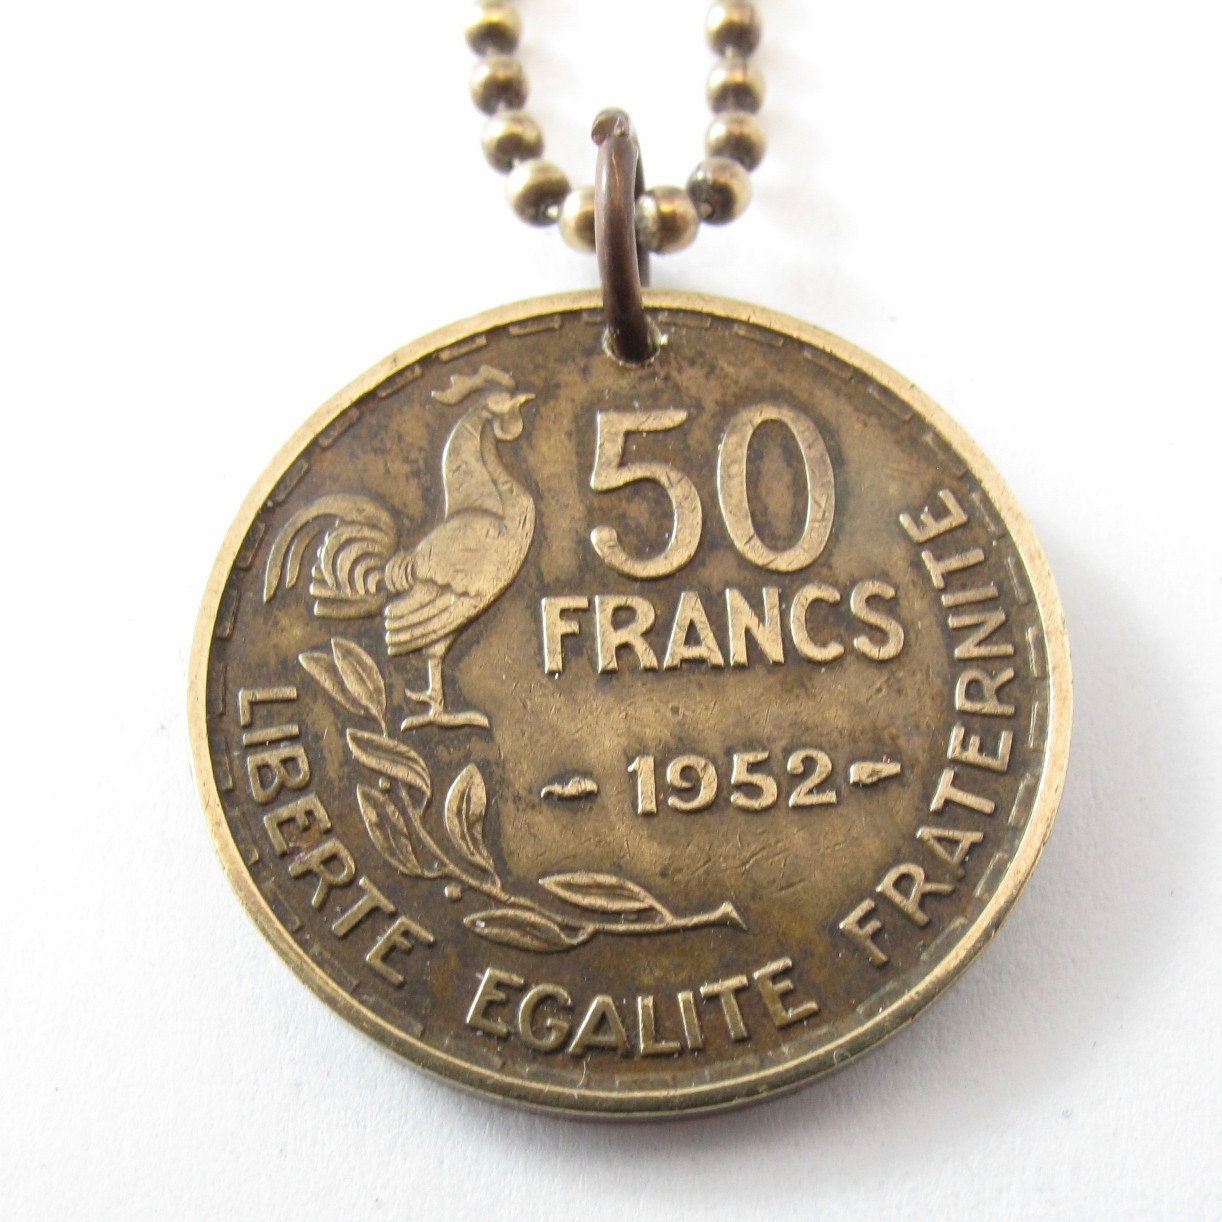 FRANCE french COIN NECKLACE 50 Franc Liberate Egalite Fraternite rooster pendant. brass chain .choose year . 951 1952 1953 No.00903 - PartsForYou